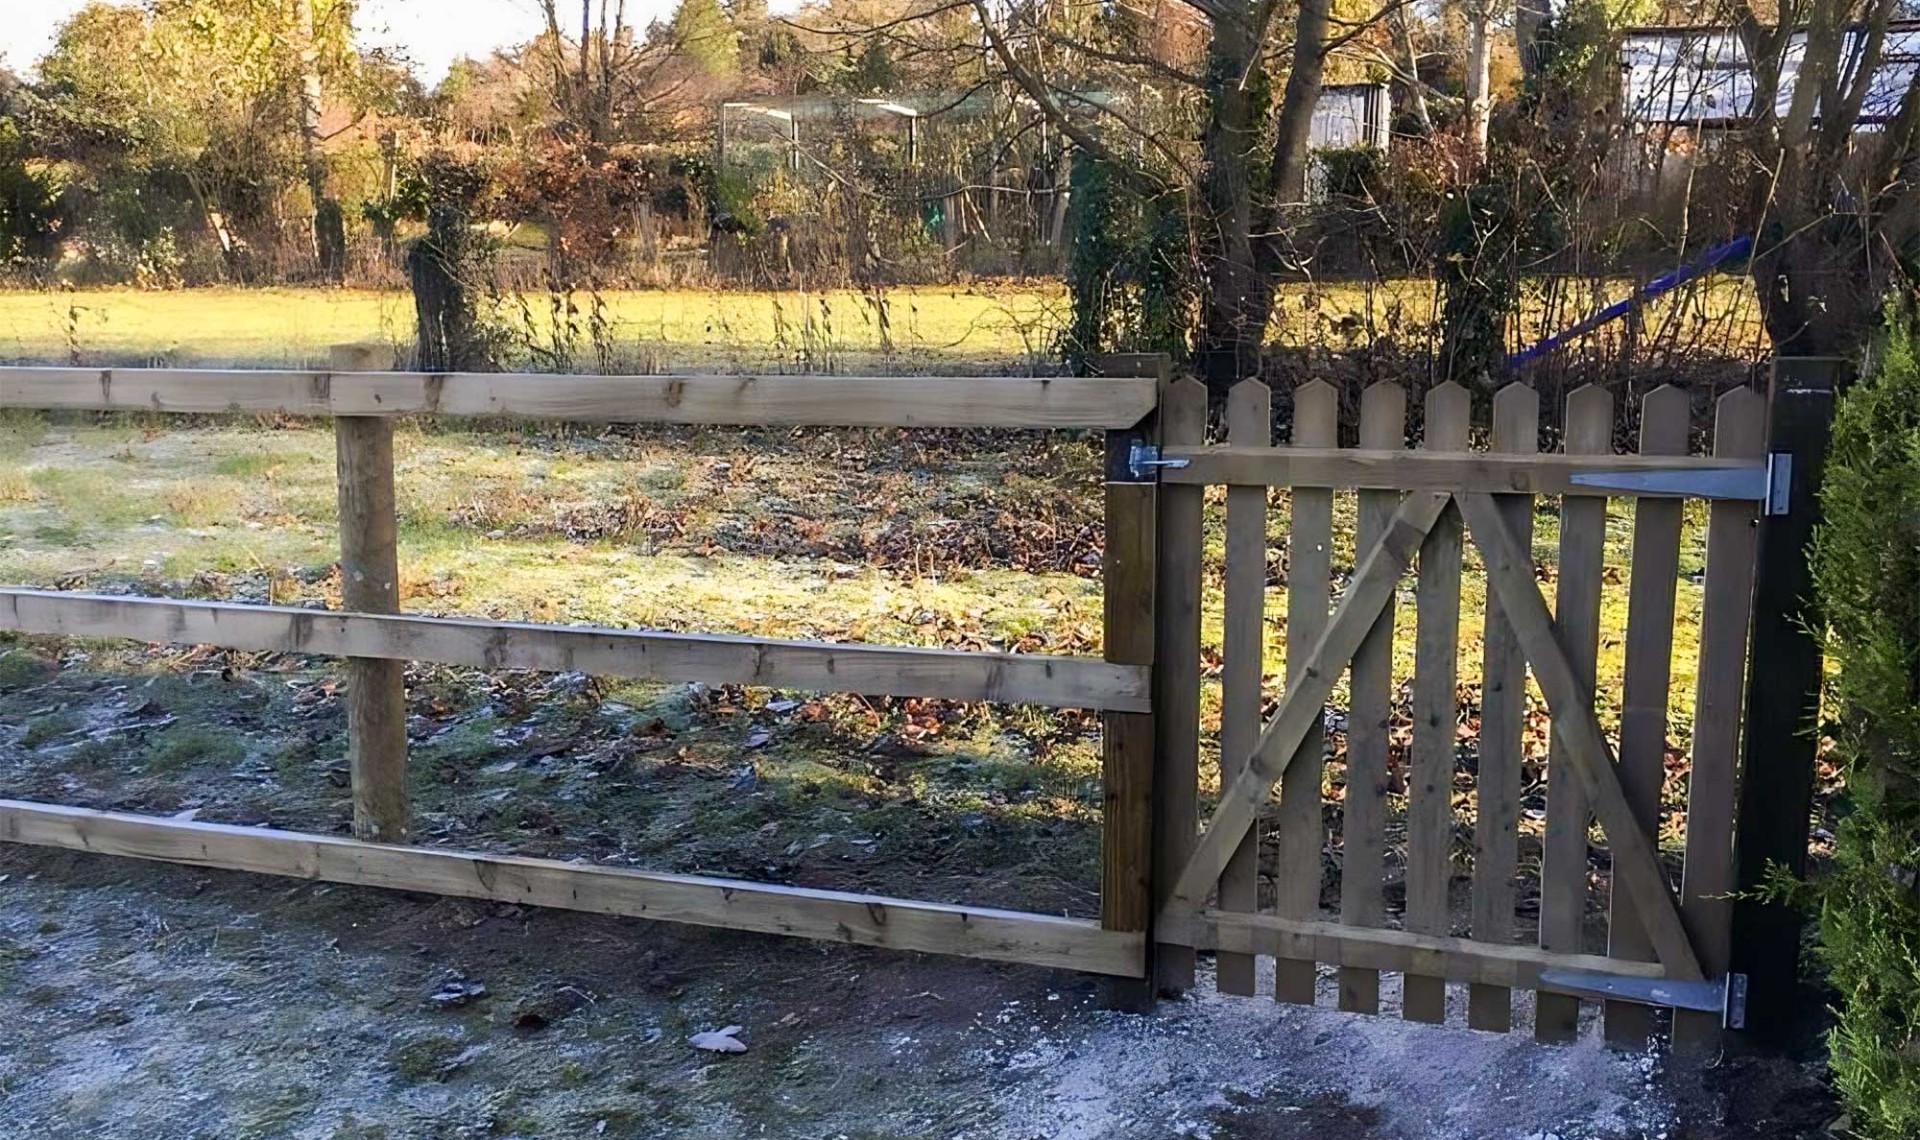 Small picket fence in countryside with wooden fencing to the left.